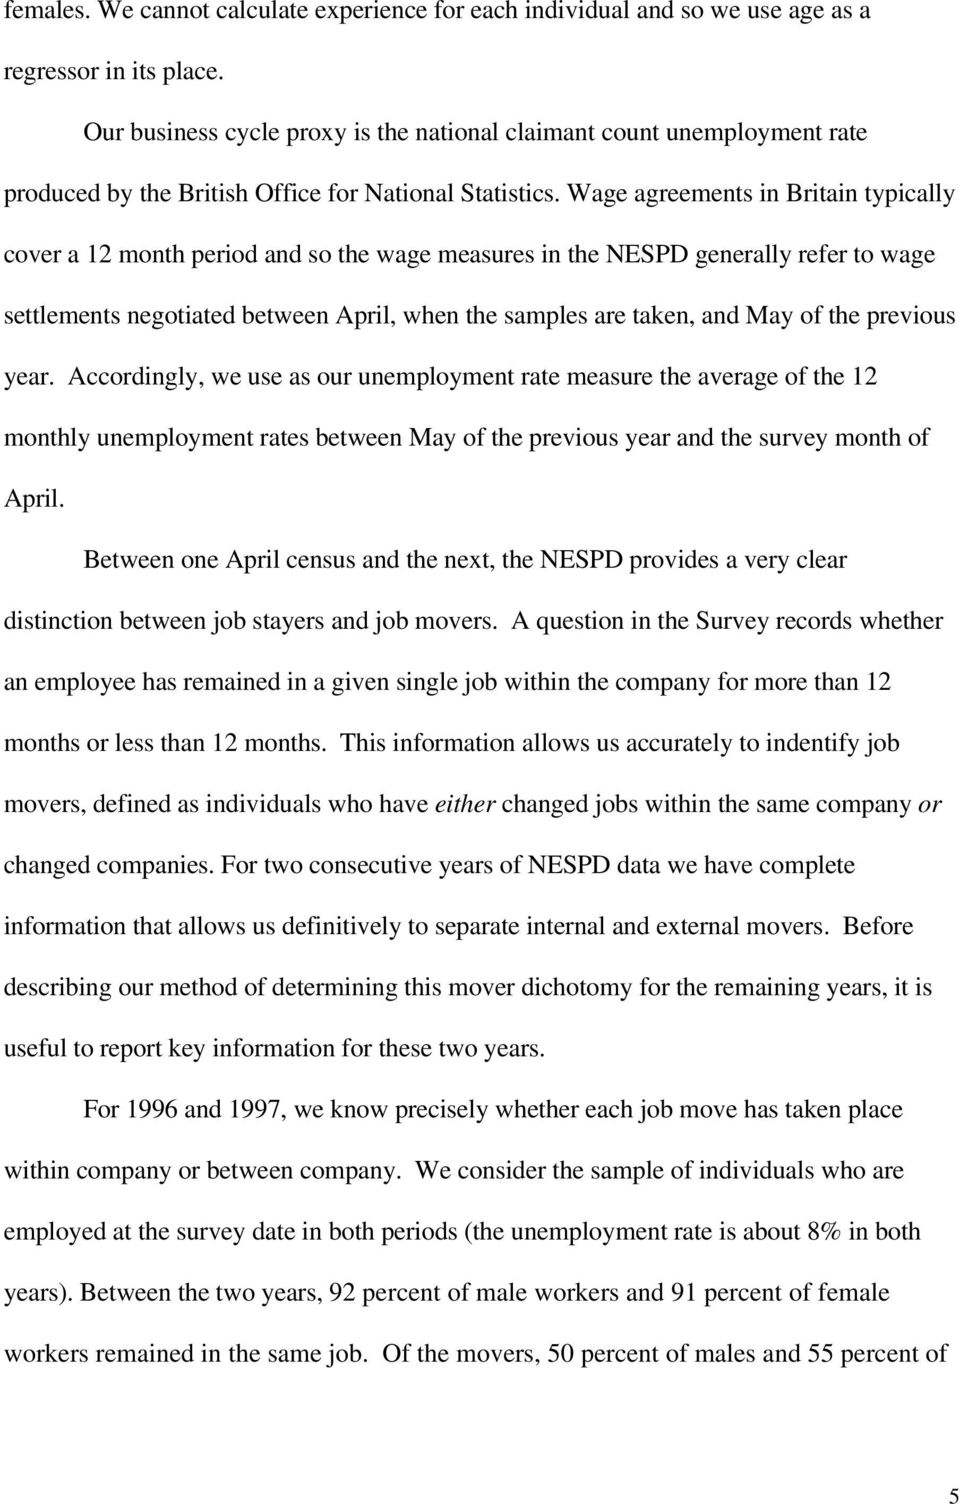 Wage agreements in Britain typically cover a 12 month period and so the wage measures in the NESPD generally refer to wage settlements negotiated between April, when the samples are taken, and May of